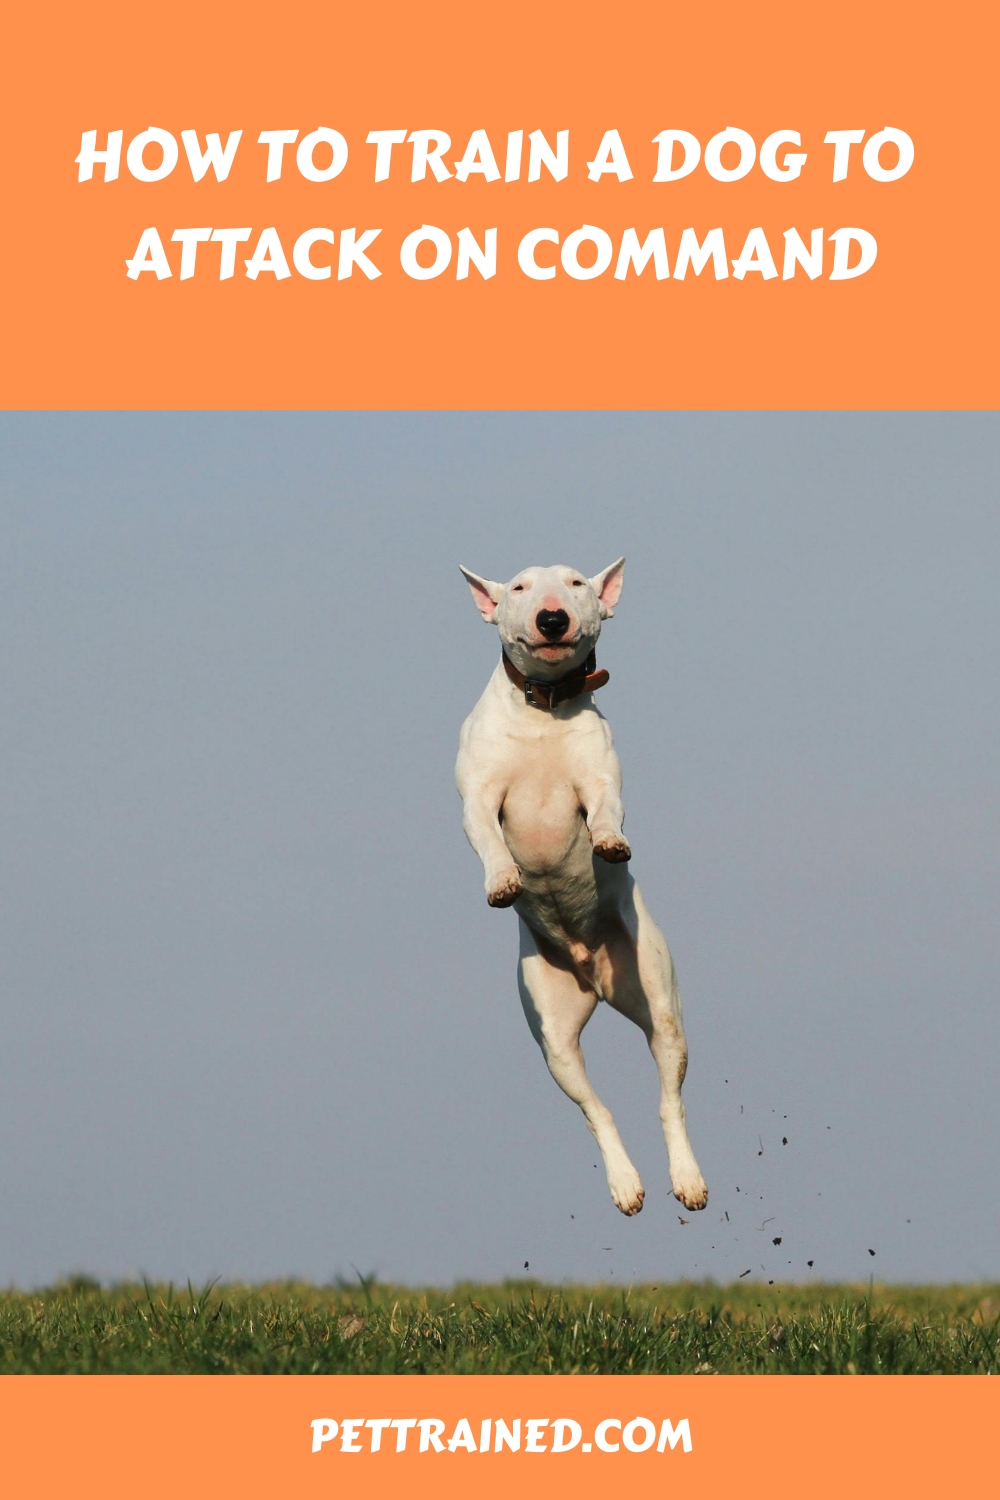 How to Train a Dog to Attack on Command